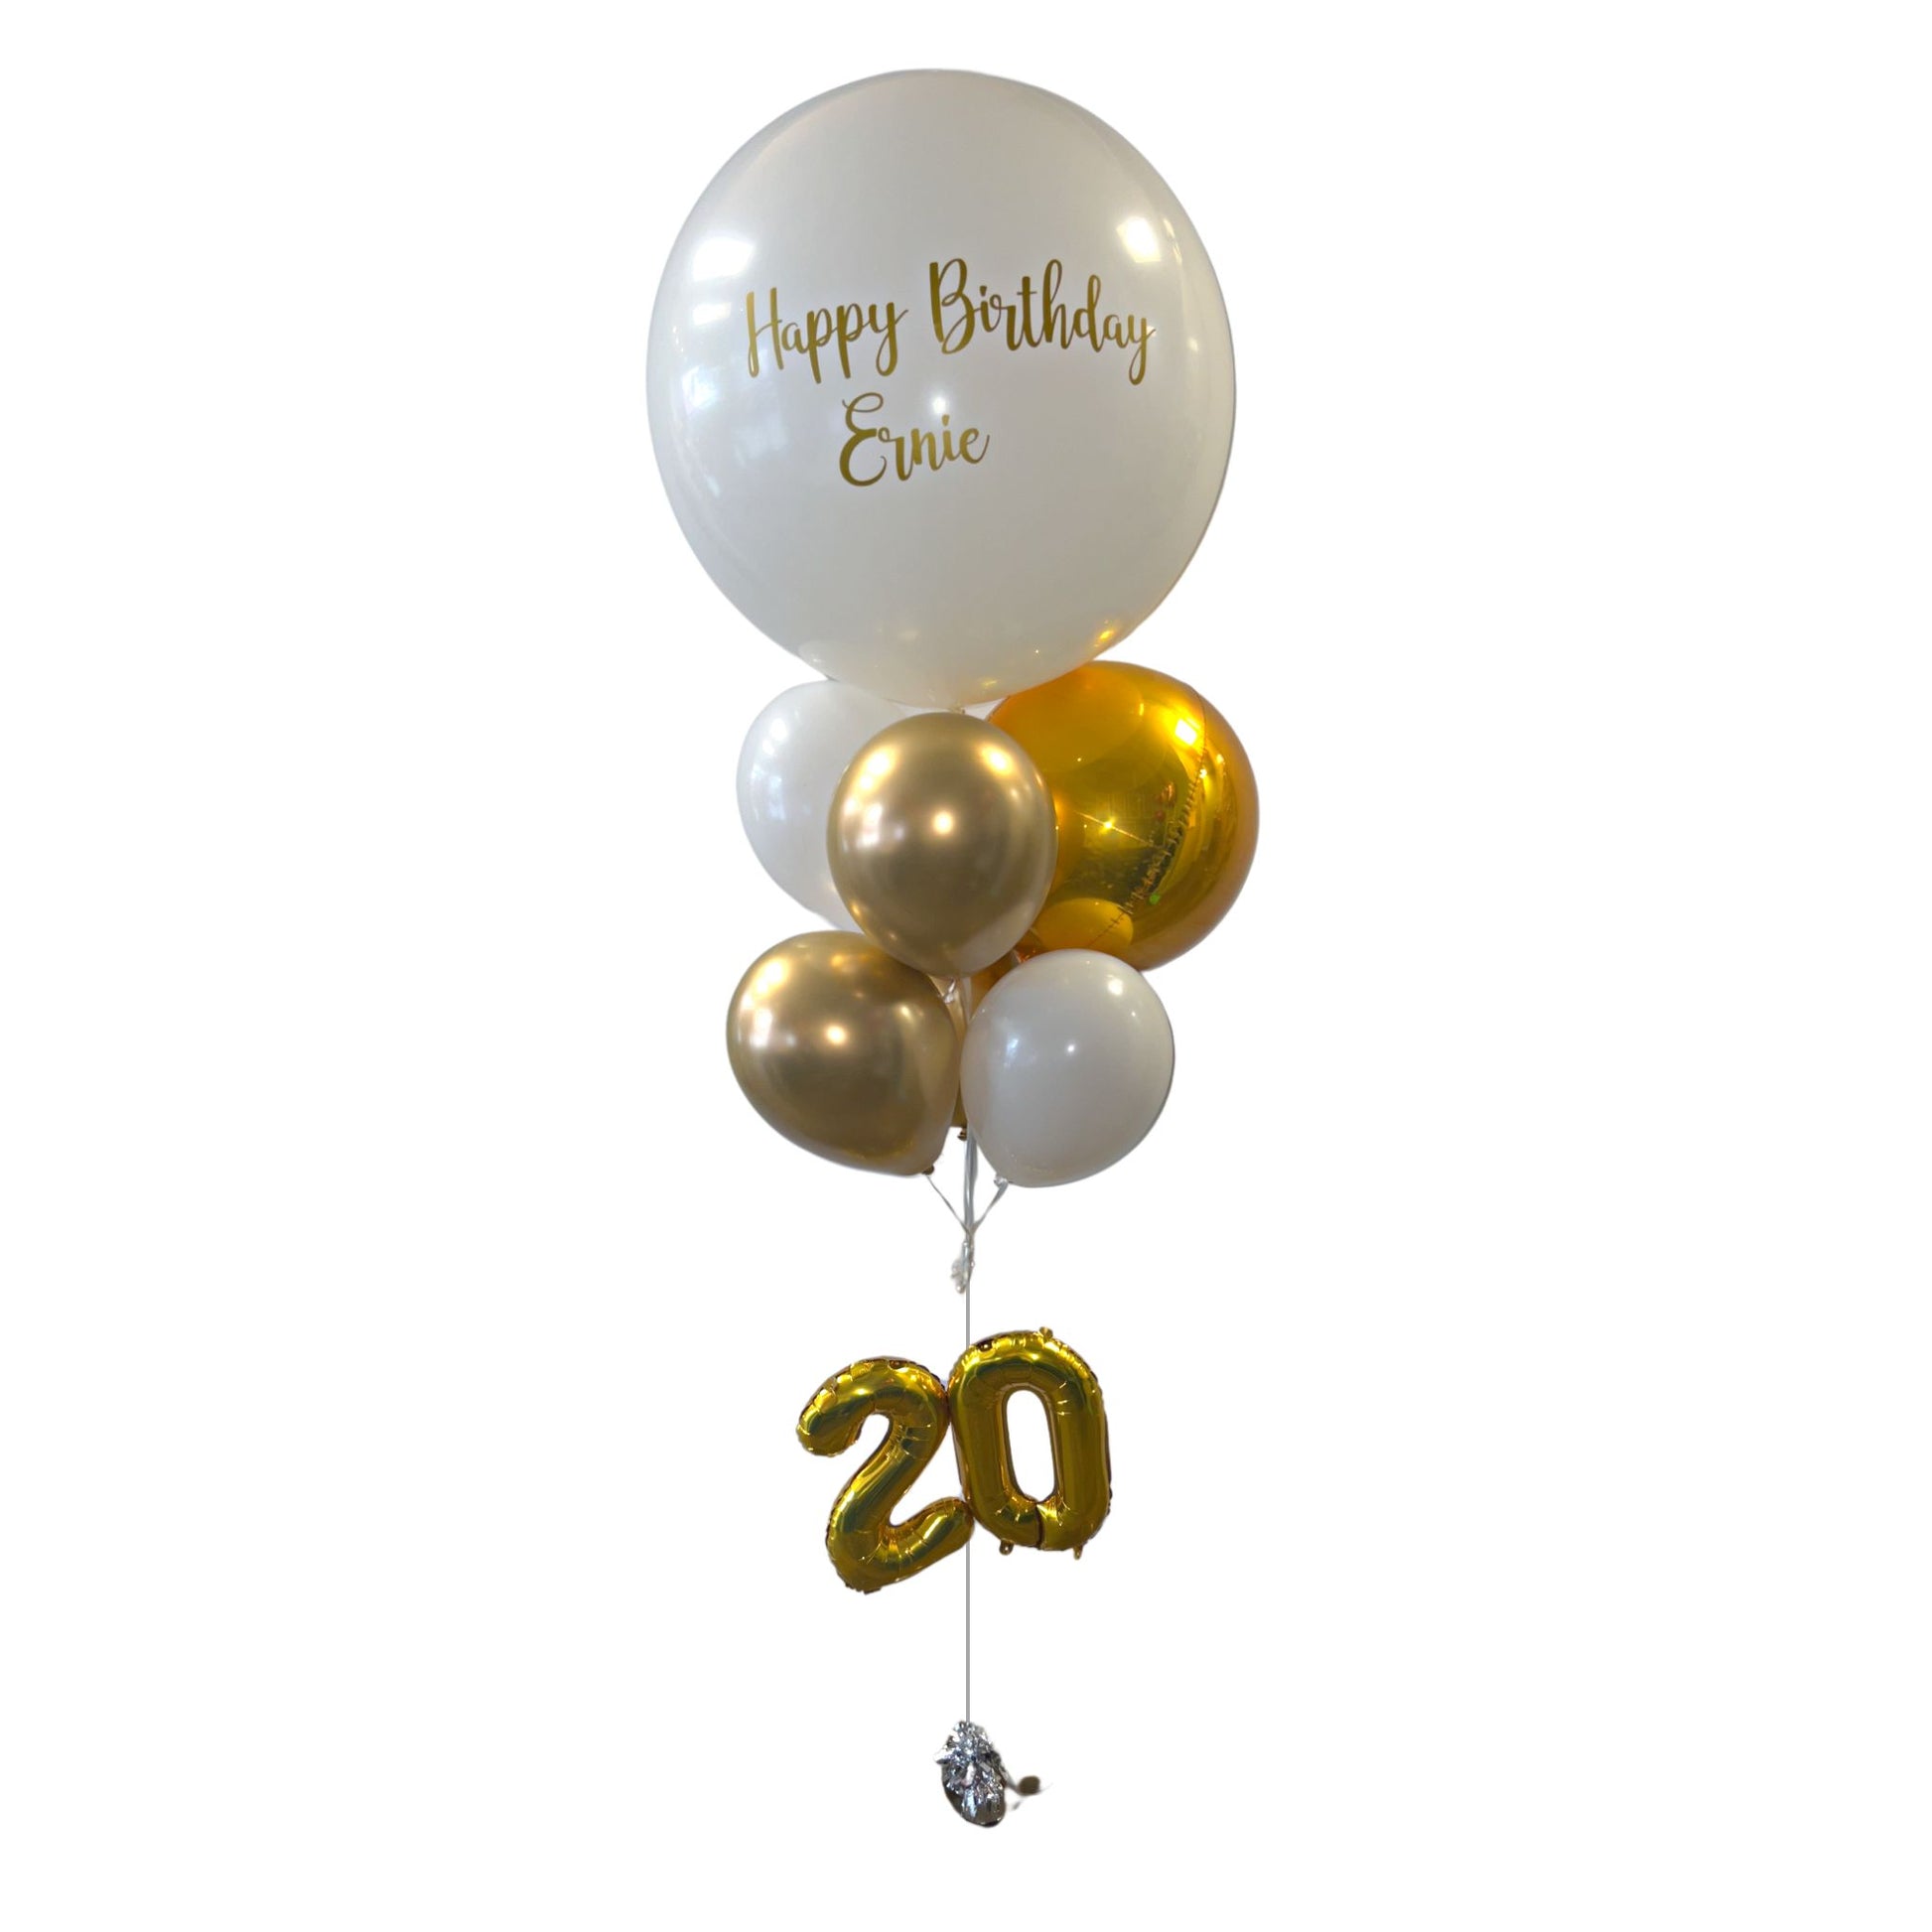 Chic Gold Script Birthday Balloon – One Up Party Canada